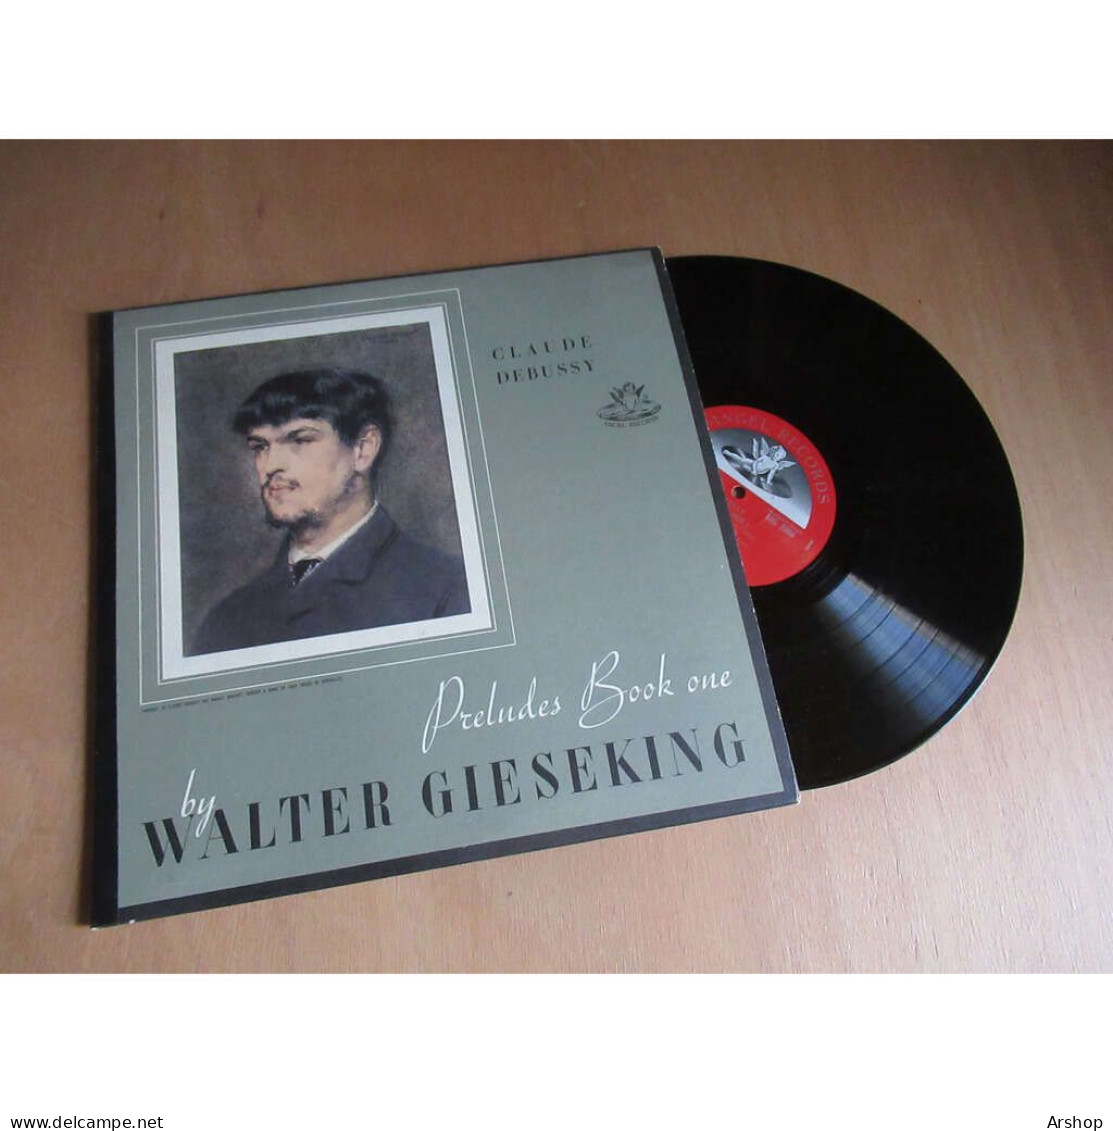 WALTER GIESEKING Preludes Book One DEBUSSY Piano Classique - ANGEL 35066 US Lp - Classical